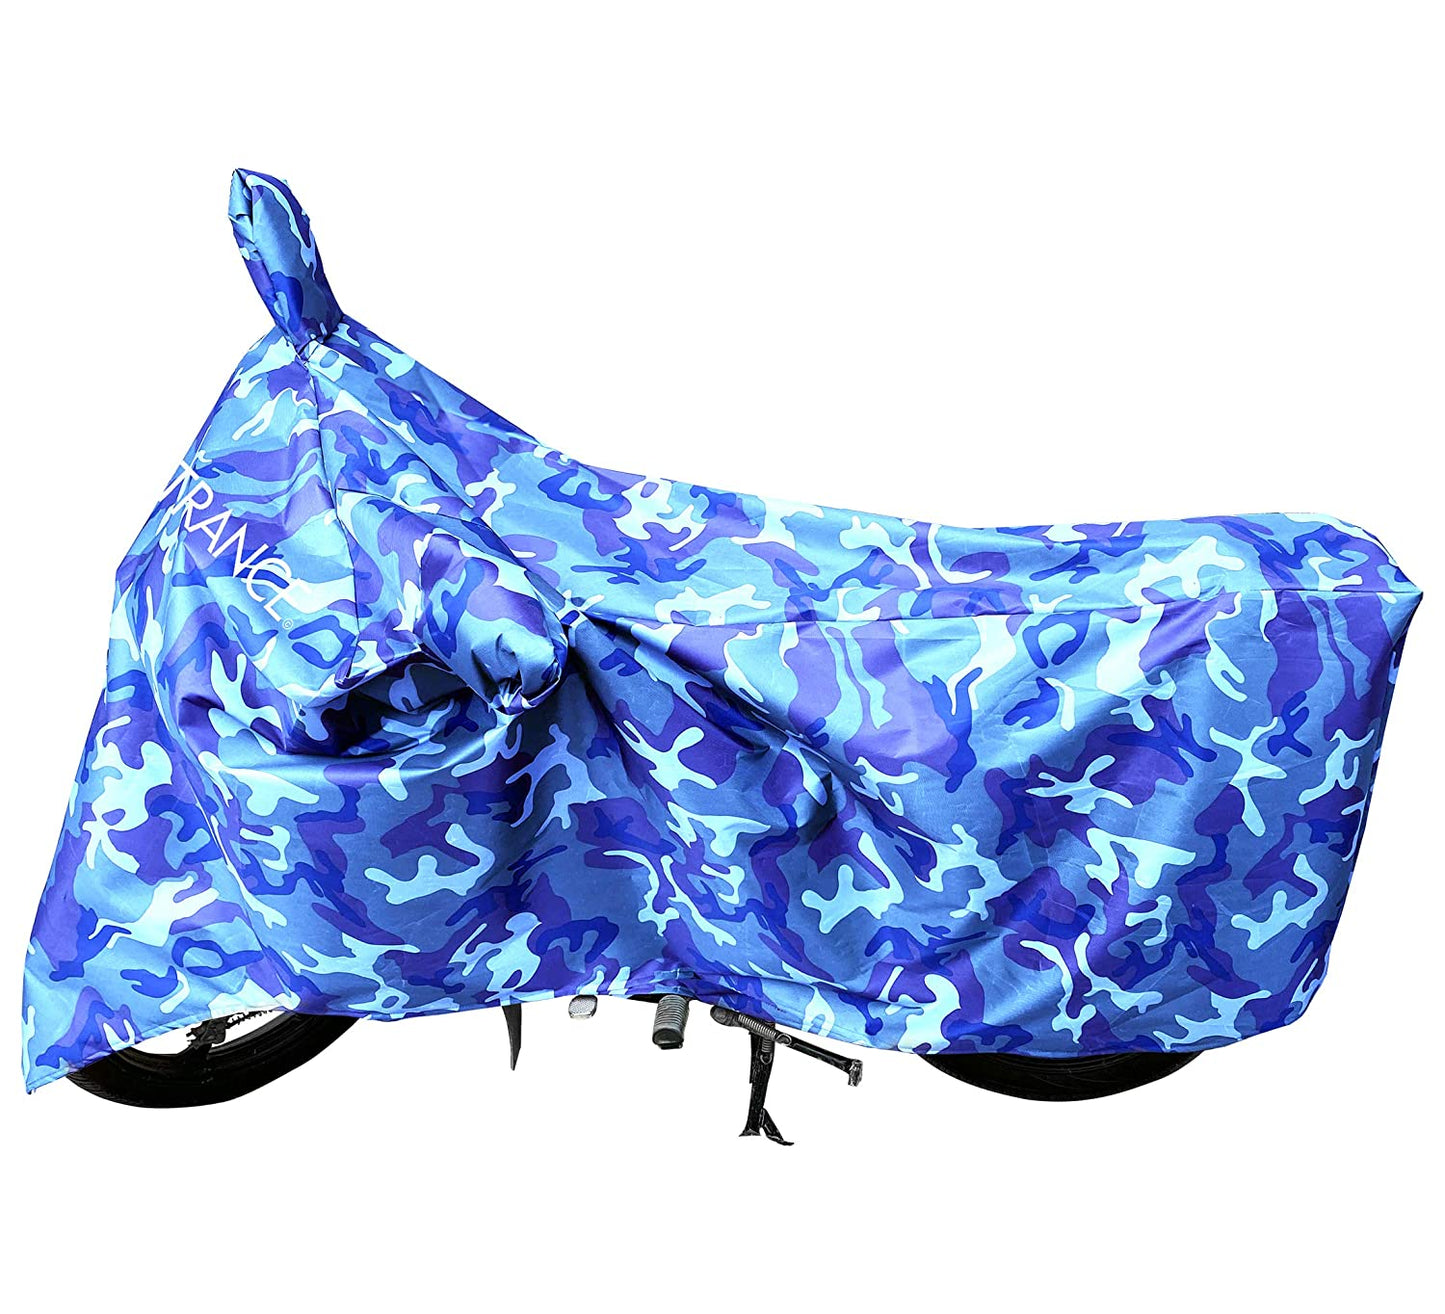 MotoTrance Jungle Bike Body Covers For TVS Apache RTR 200 4V - Interlock-Stitched Waterproof and Heat Resistant with Mirror Pockets